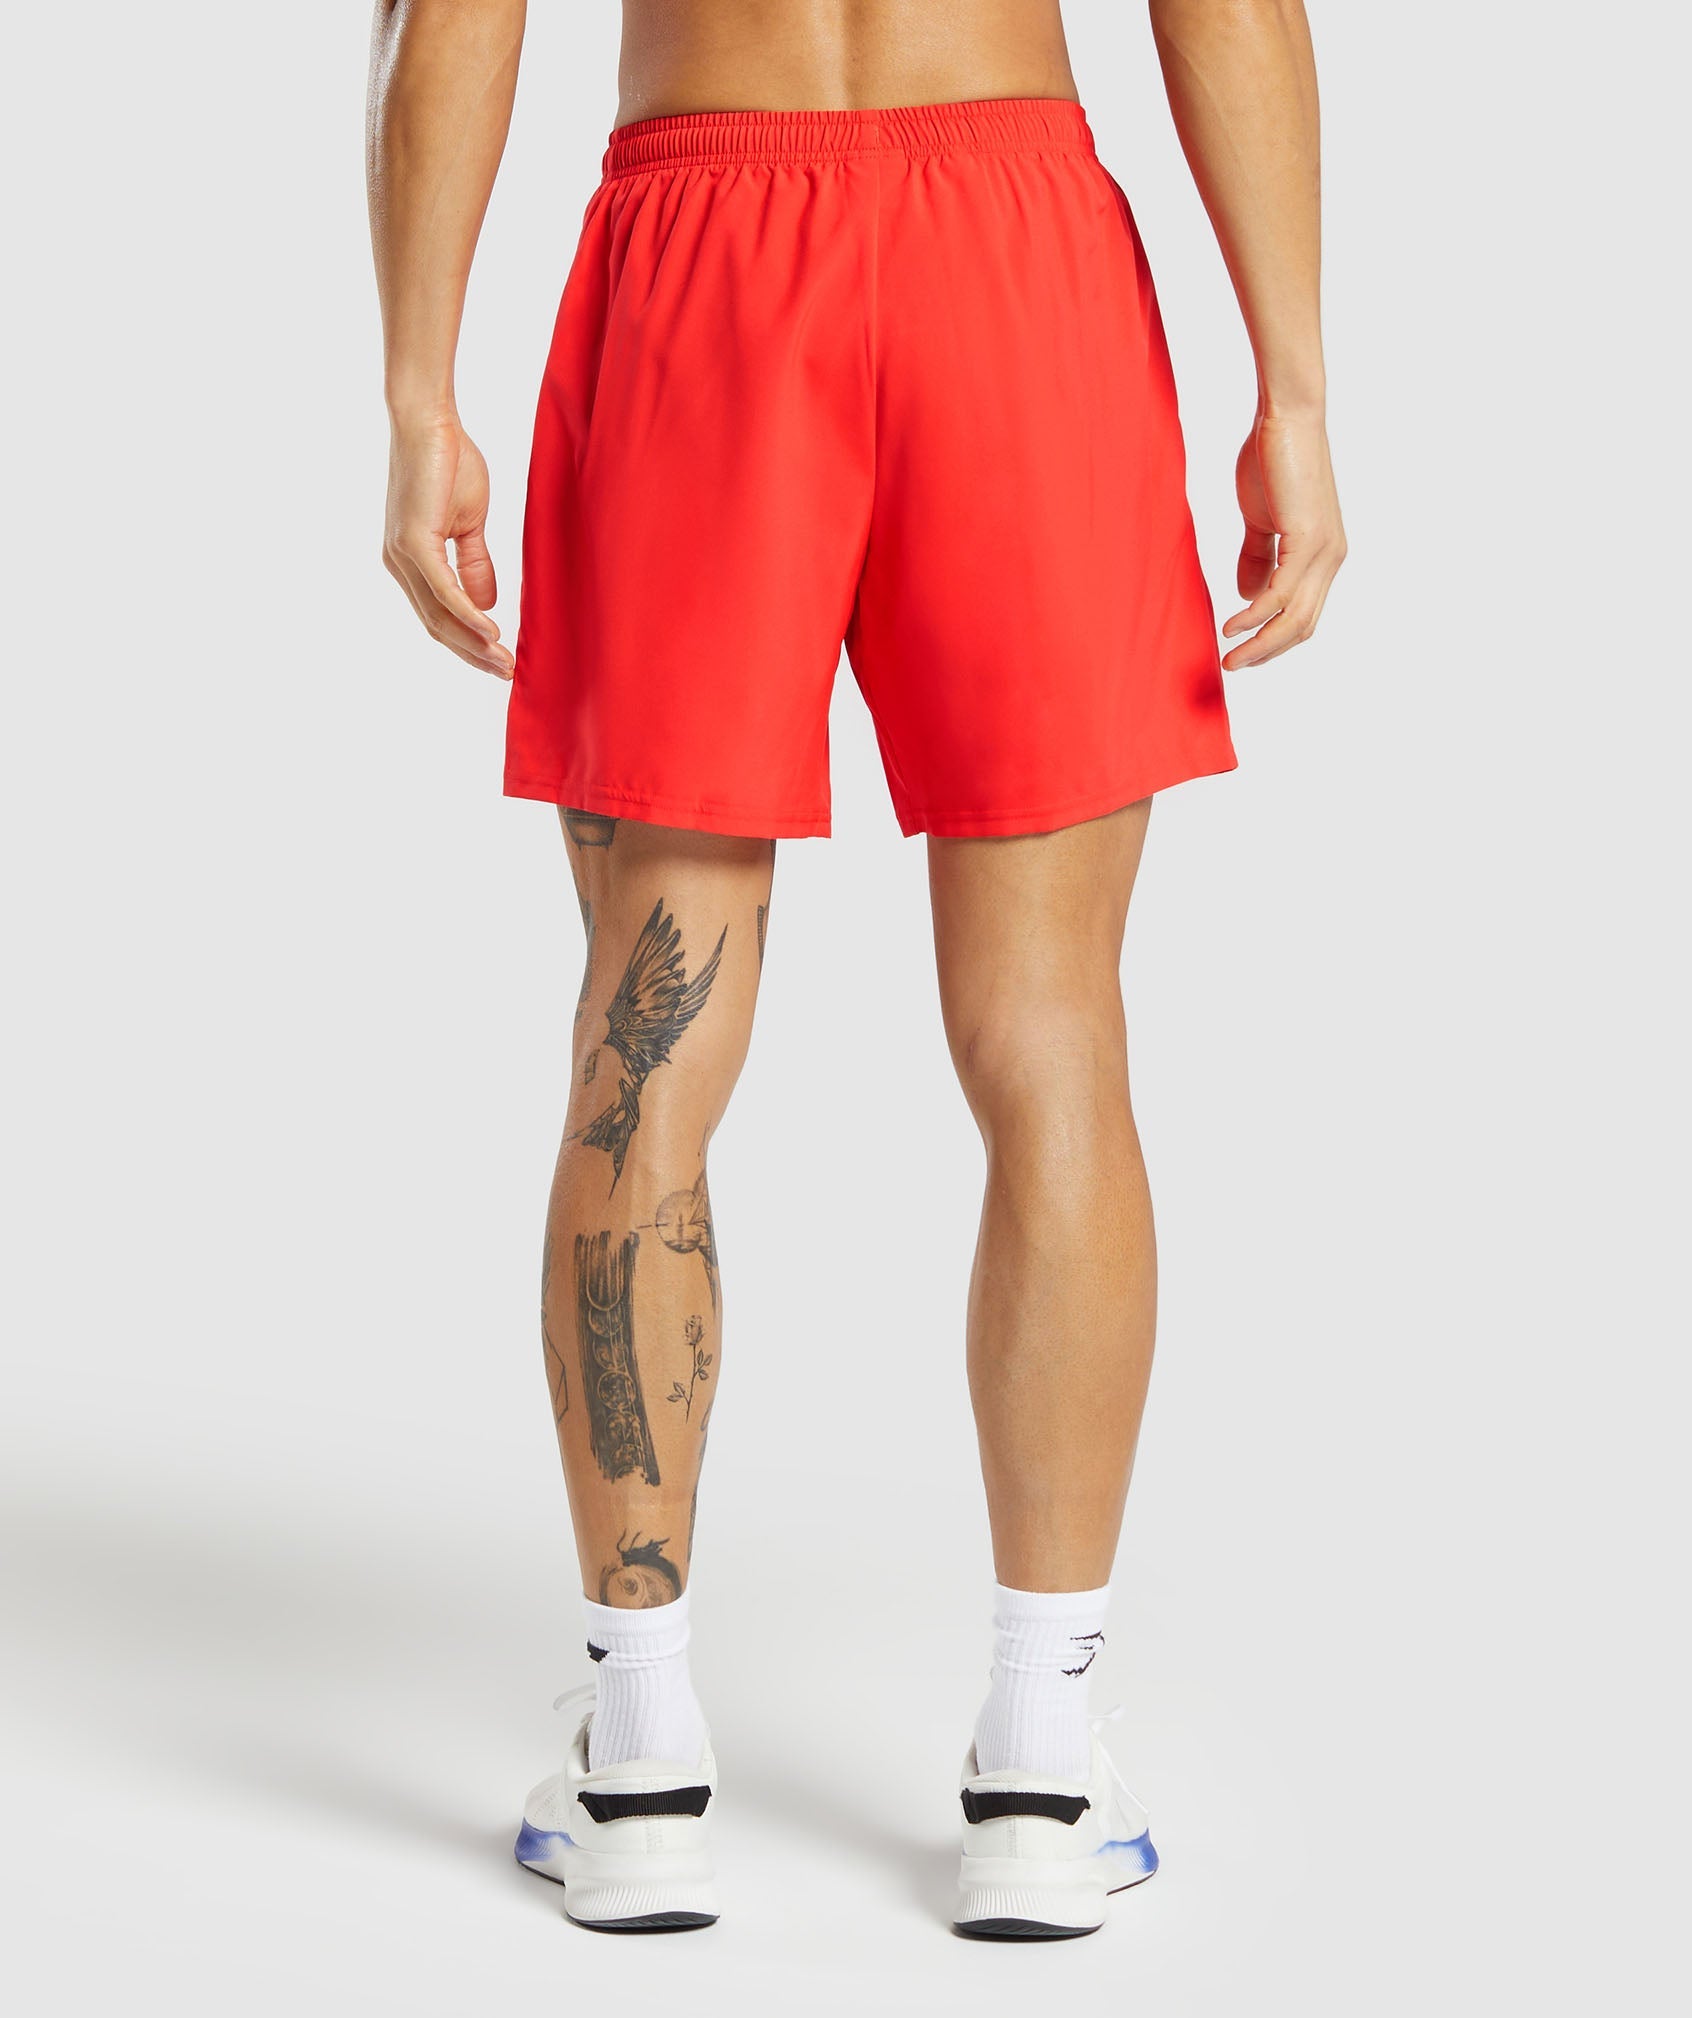 Arrival 7" Shorts in Pow Red - view 2